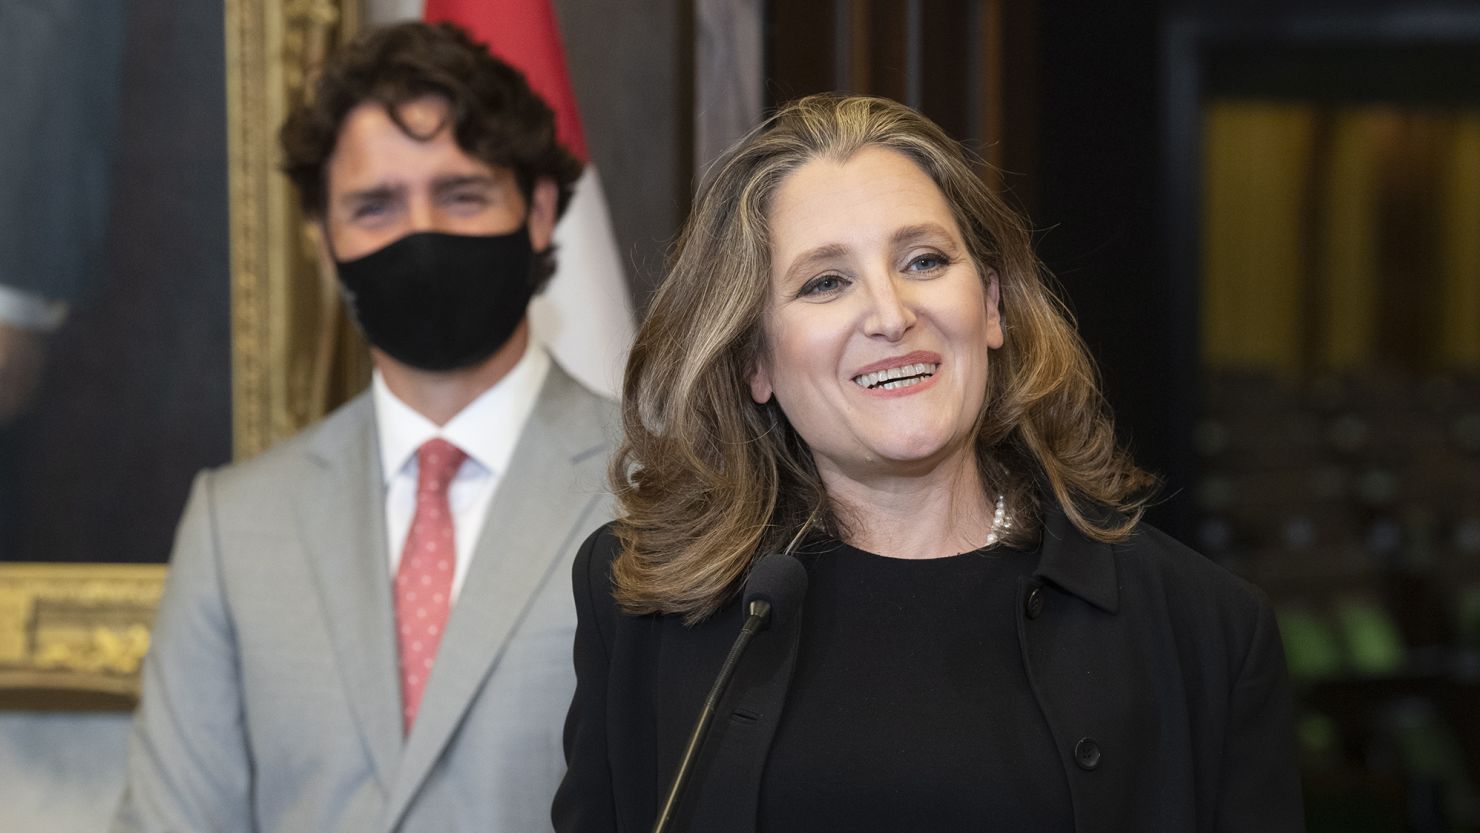 Finance Minister Chrystia Freeland smiles as she responds to a question as Prime Minister Justin Trudeau looks on during a news conference on parliament hill in Ottawa on Tuesday.